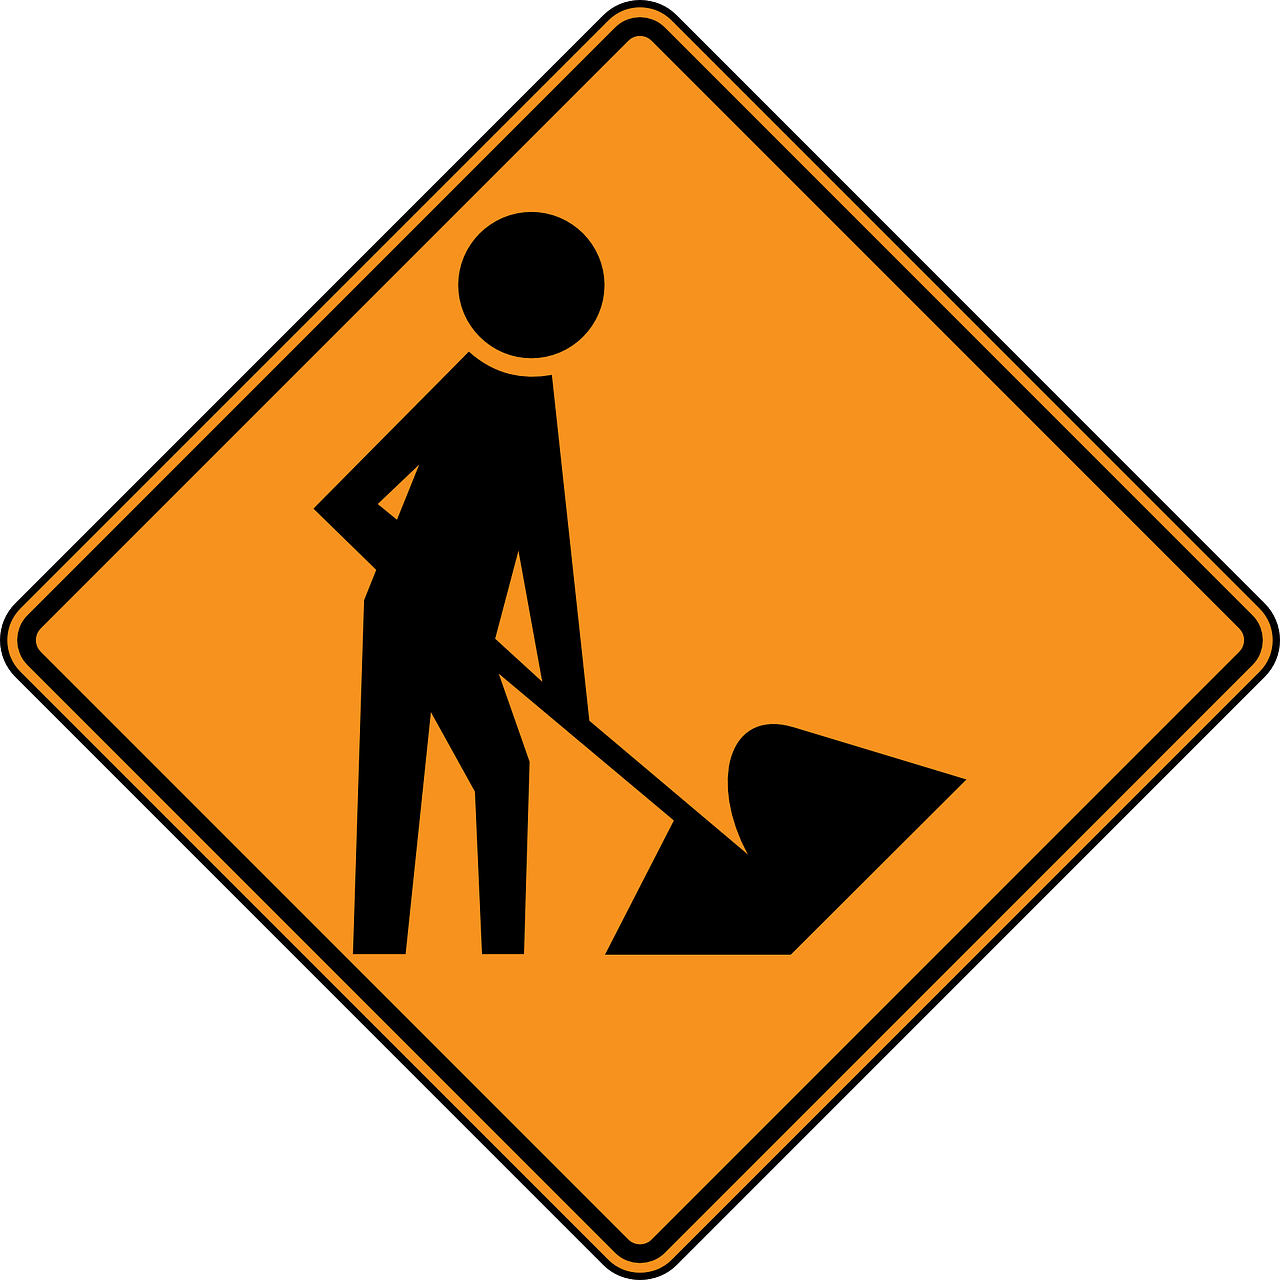 Construction Sign